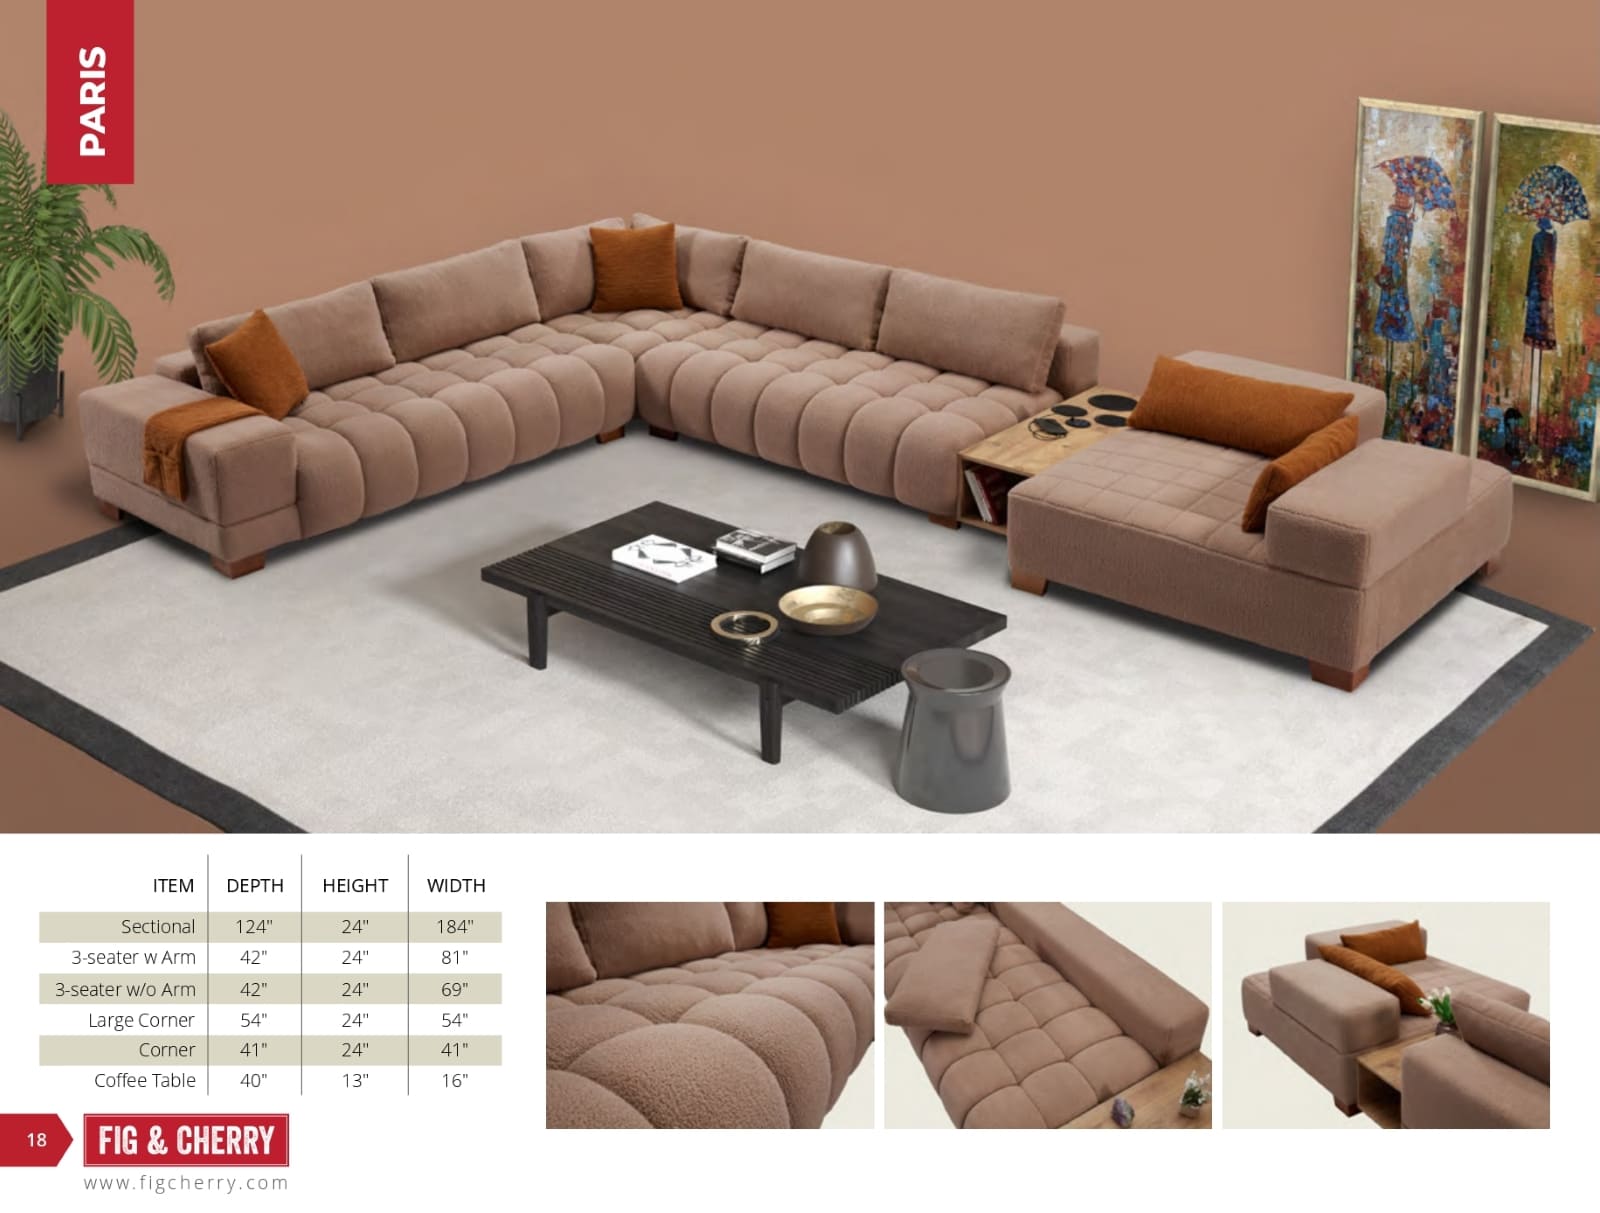 Fig & Cherry Indoor Collection (Sofas and Sectionals) Catalog (18)